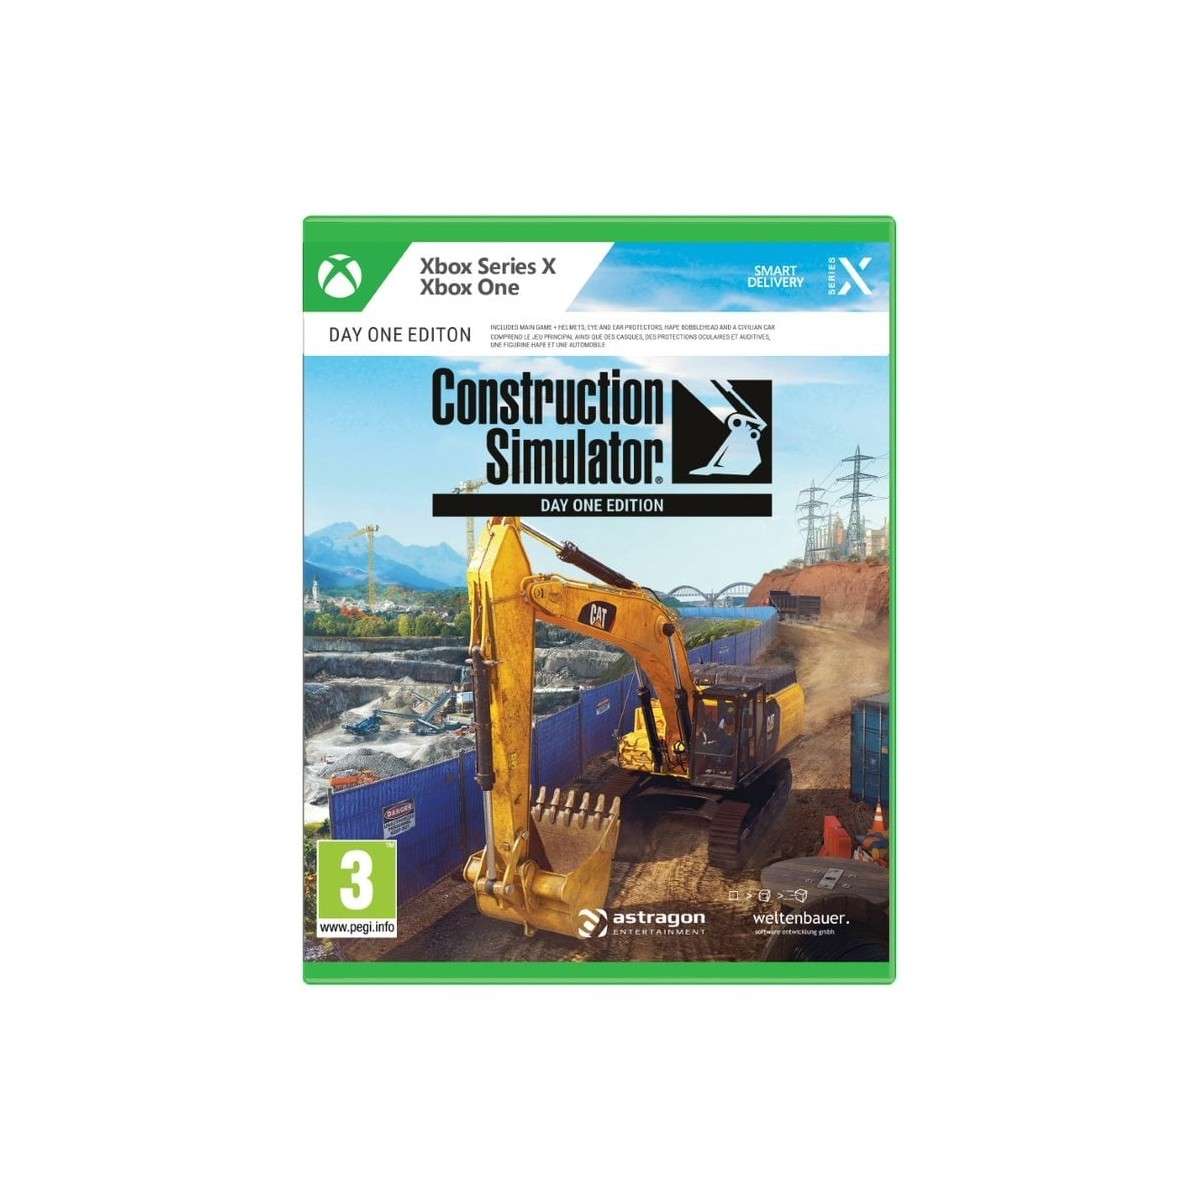 Build One Videojuegos Edition) with Diagnose Simulator and - X Series Xbox Construction for (Day